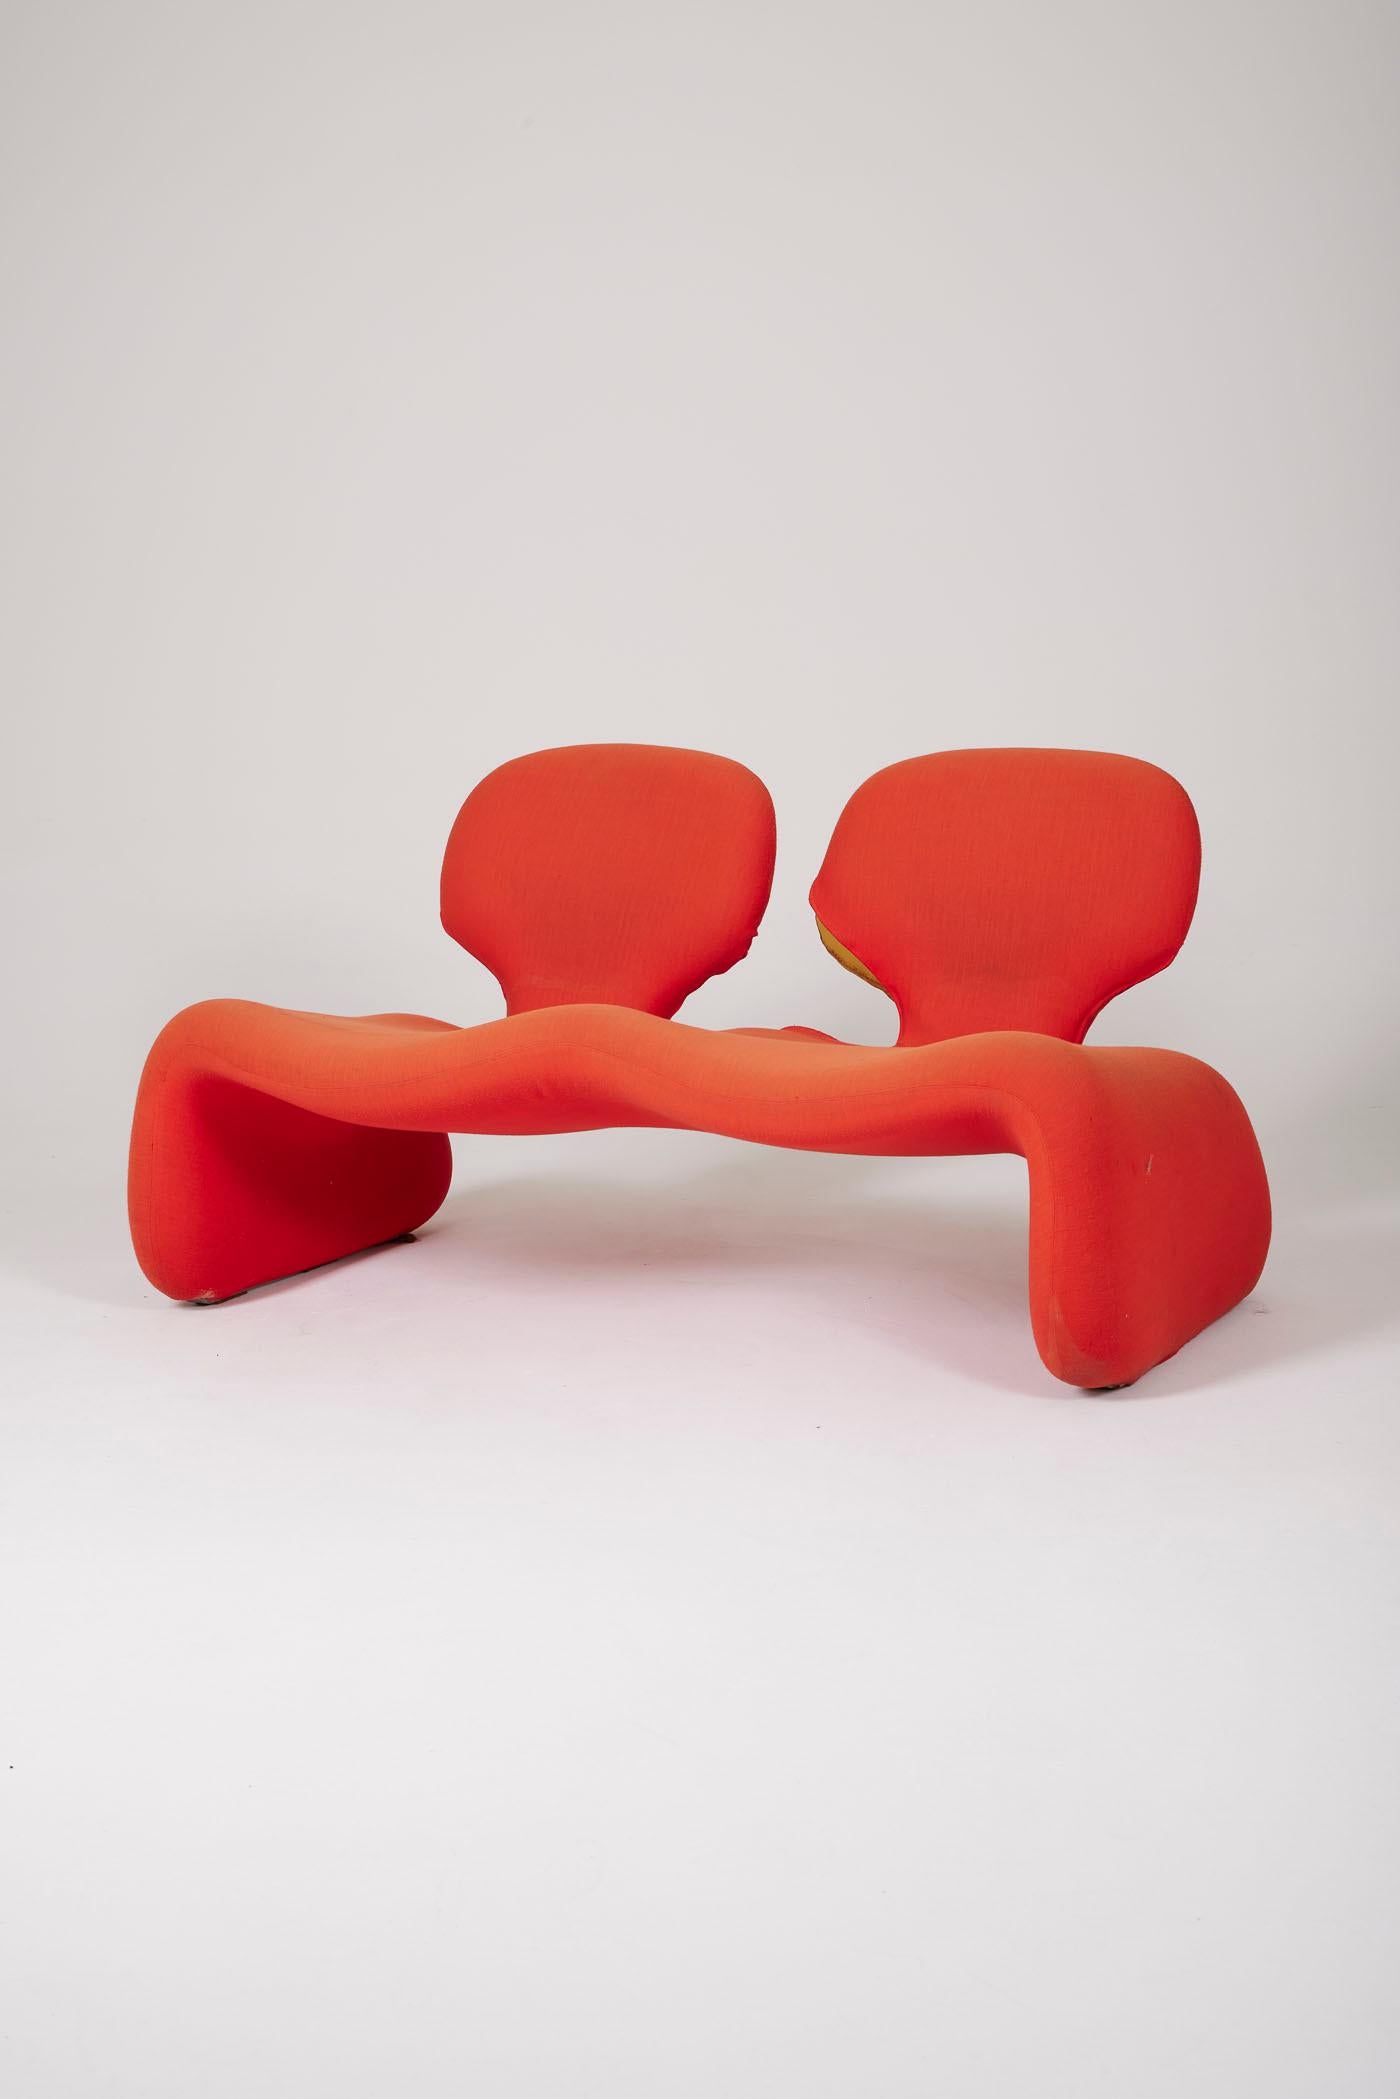 Two-seater sofa model Djinn by French designer Olivier Mourgue for Airborne, 1960s. Metal frame padded with foam and covered in its original red Kvadrat fabric. This sofa gained fame through Stanley Kubrick's 2001: A Space Odyssey. It is ready for